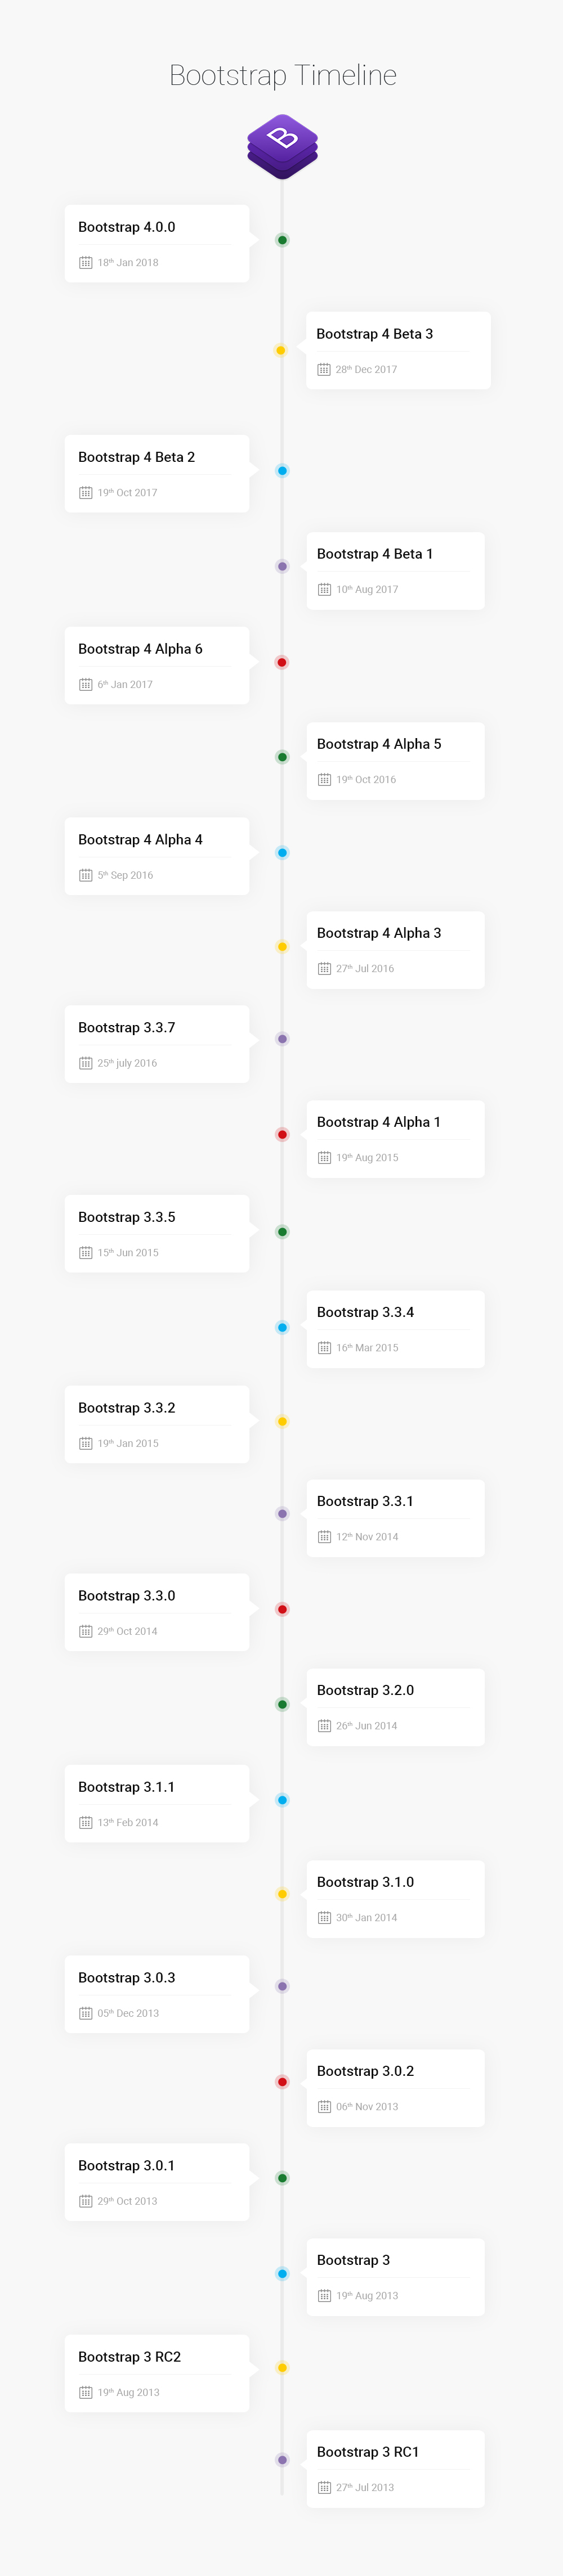 Bootstrap release dates timeline